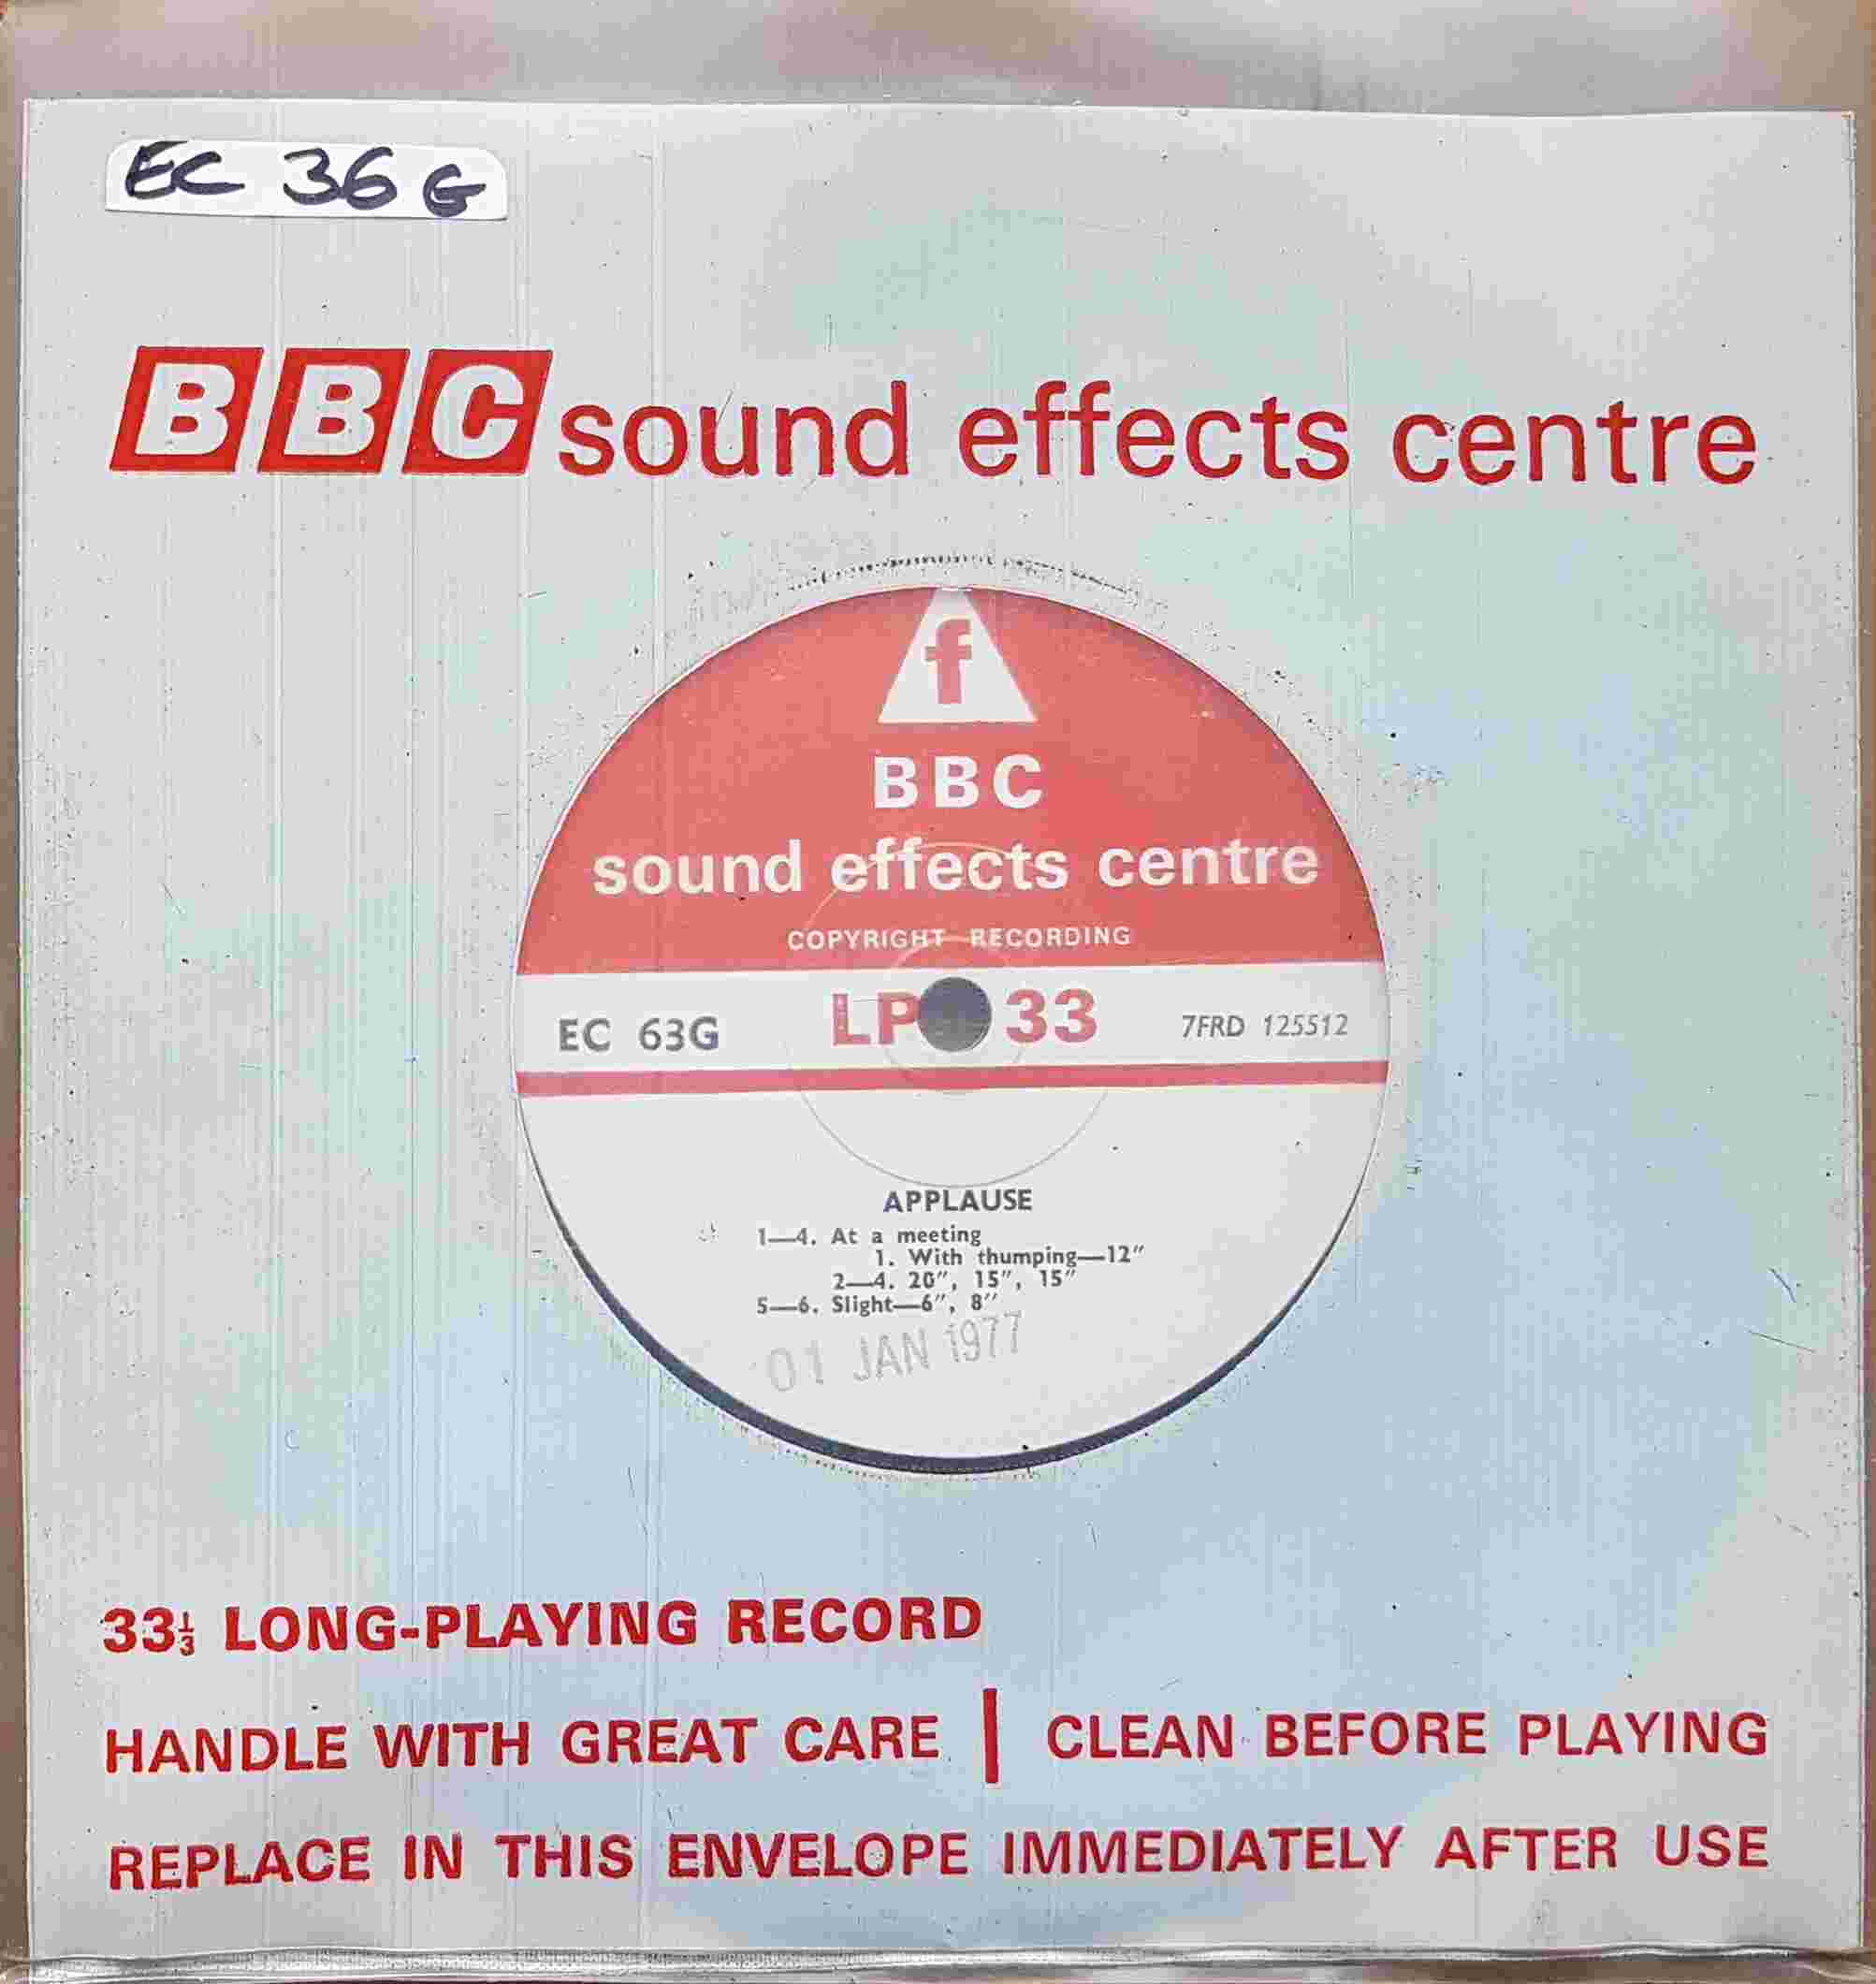 Picture of EC 63G Applause by artist Not registered from the BBC records and Tapes library